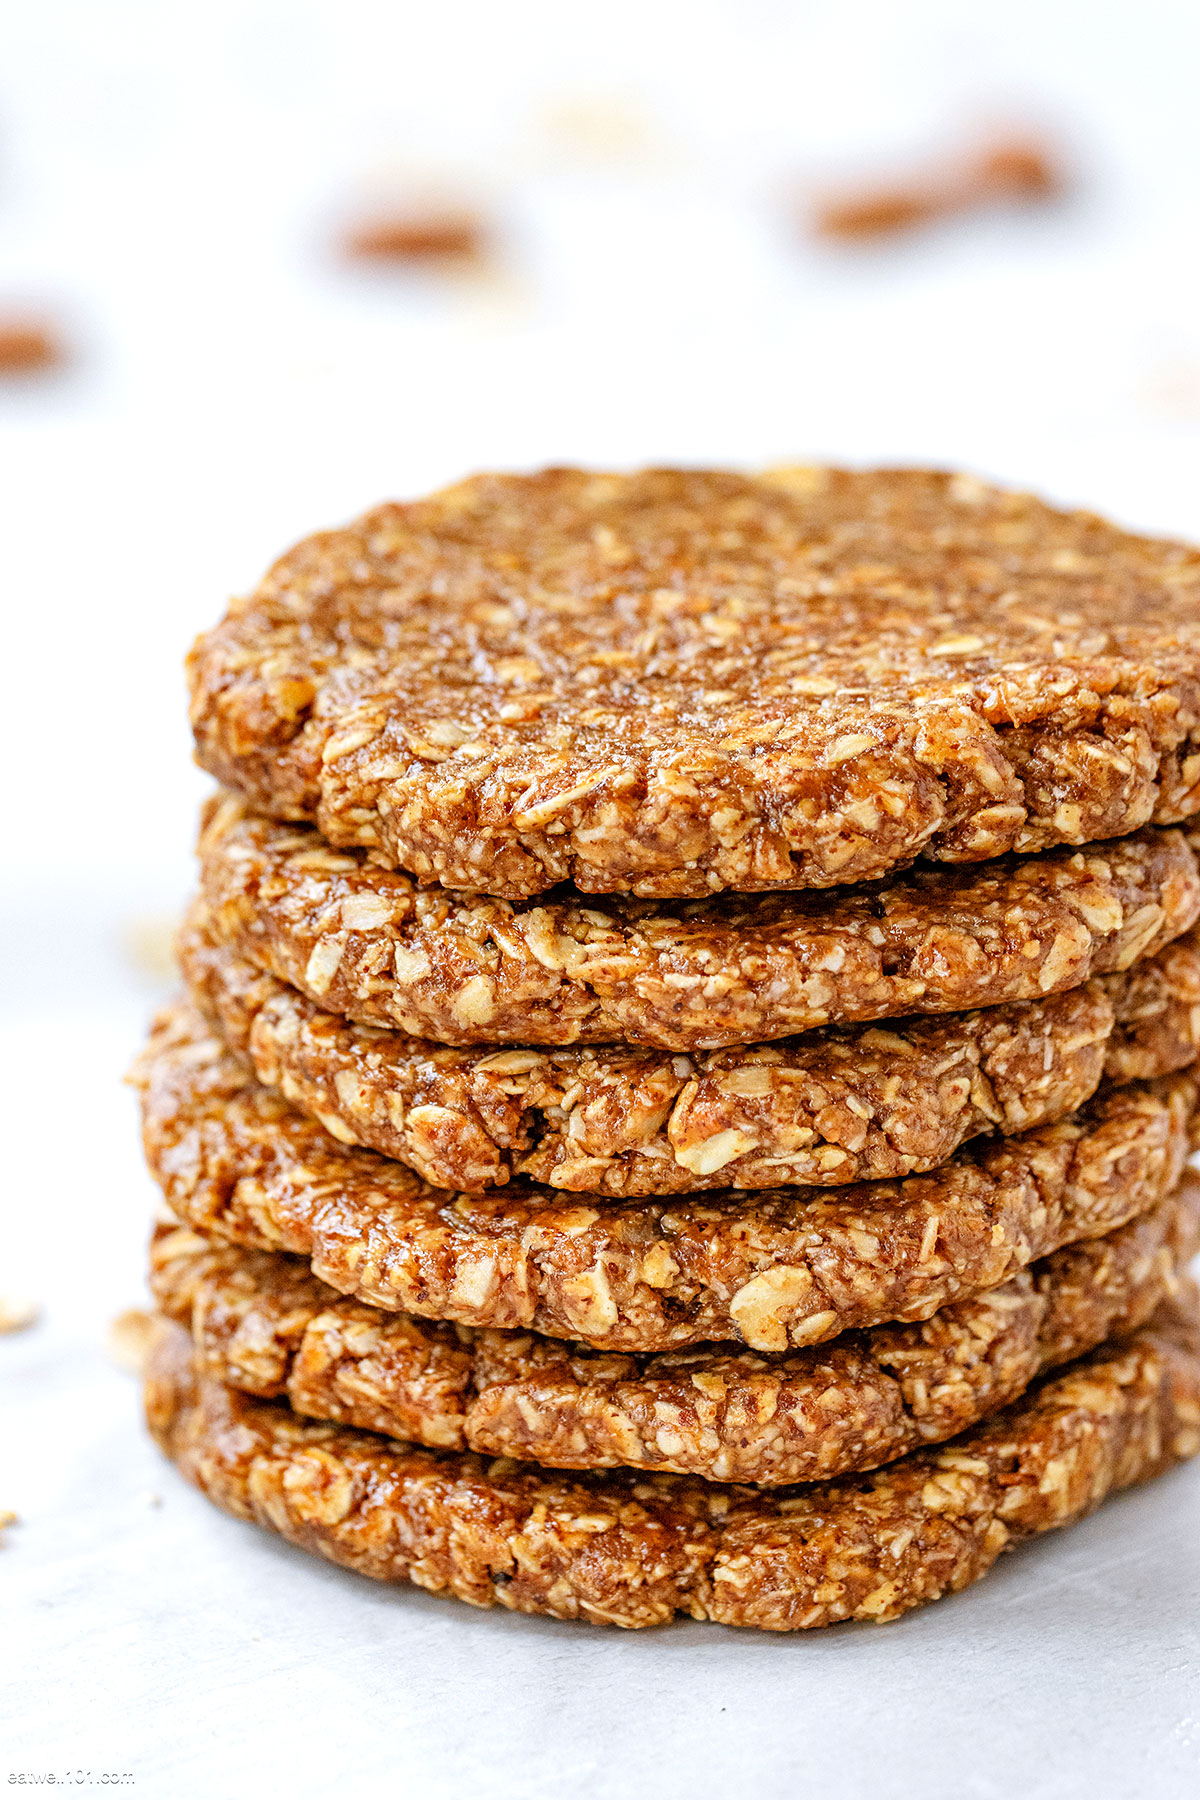 No Bake Oatmeal Cookies (3 Ingredients!) - The Big Man's World ®